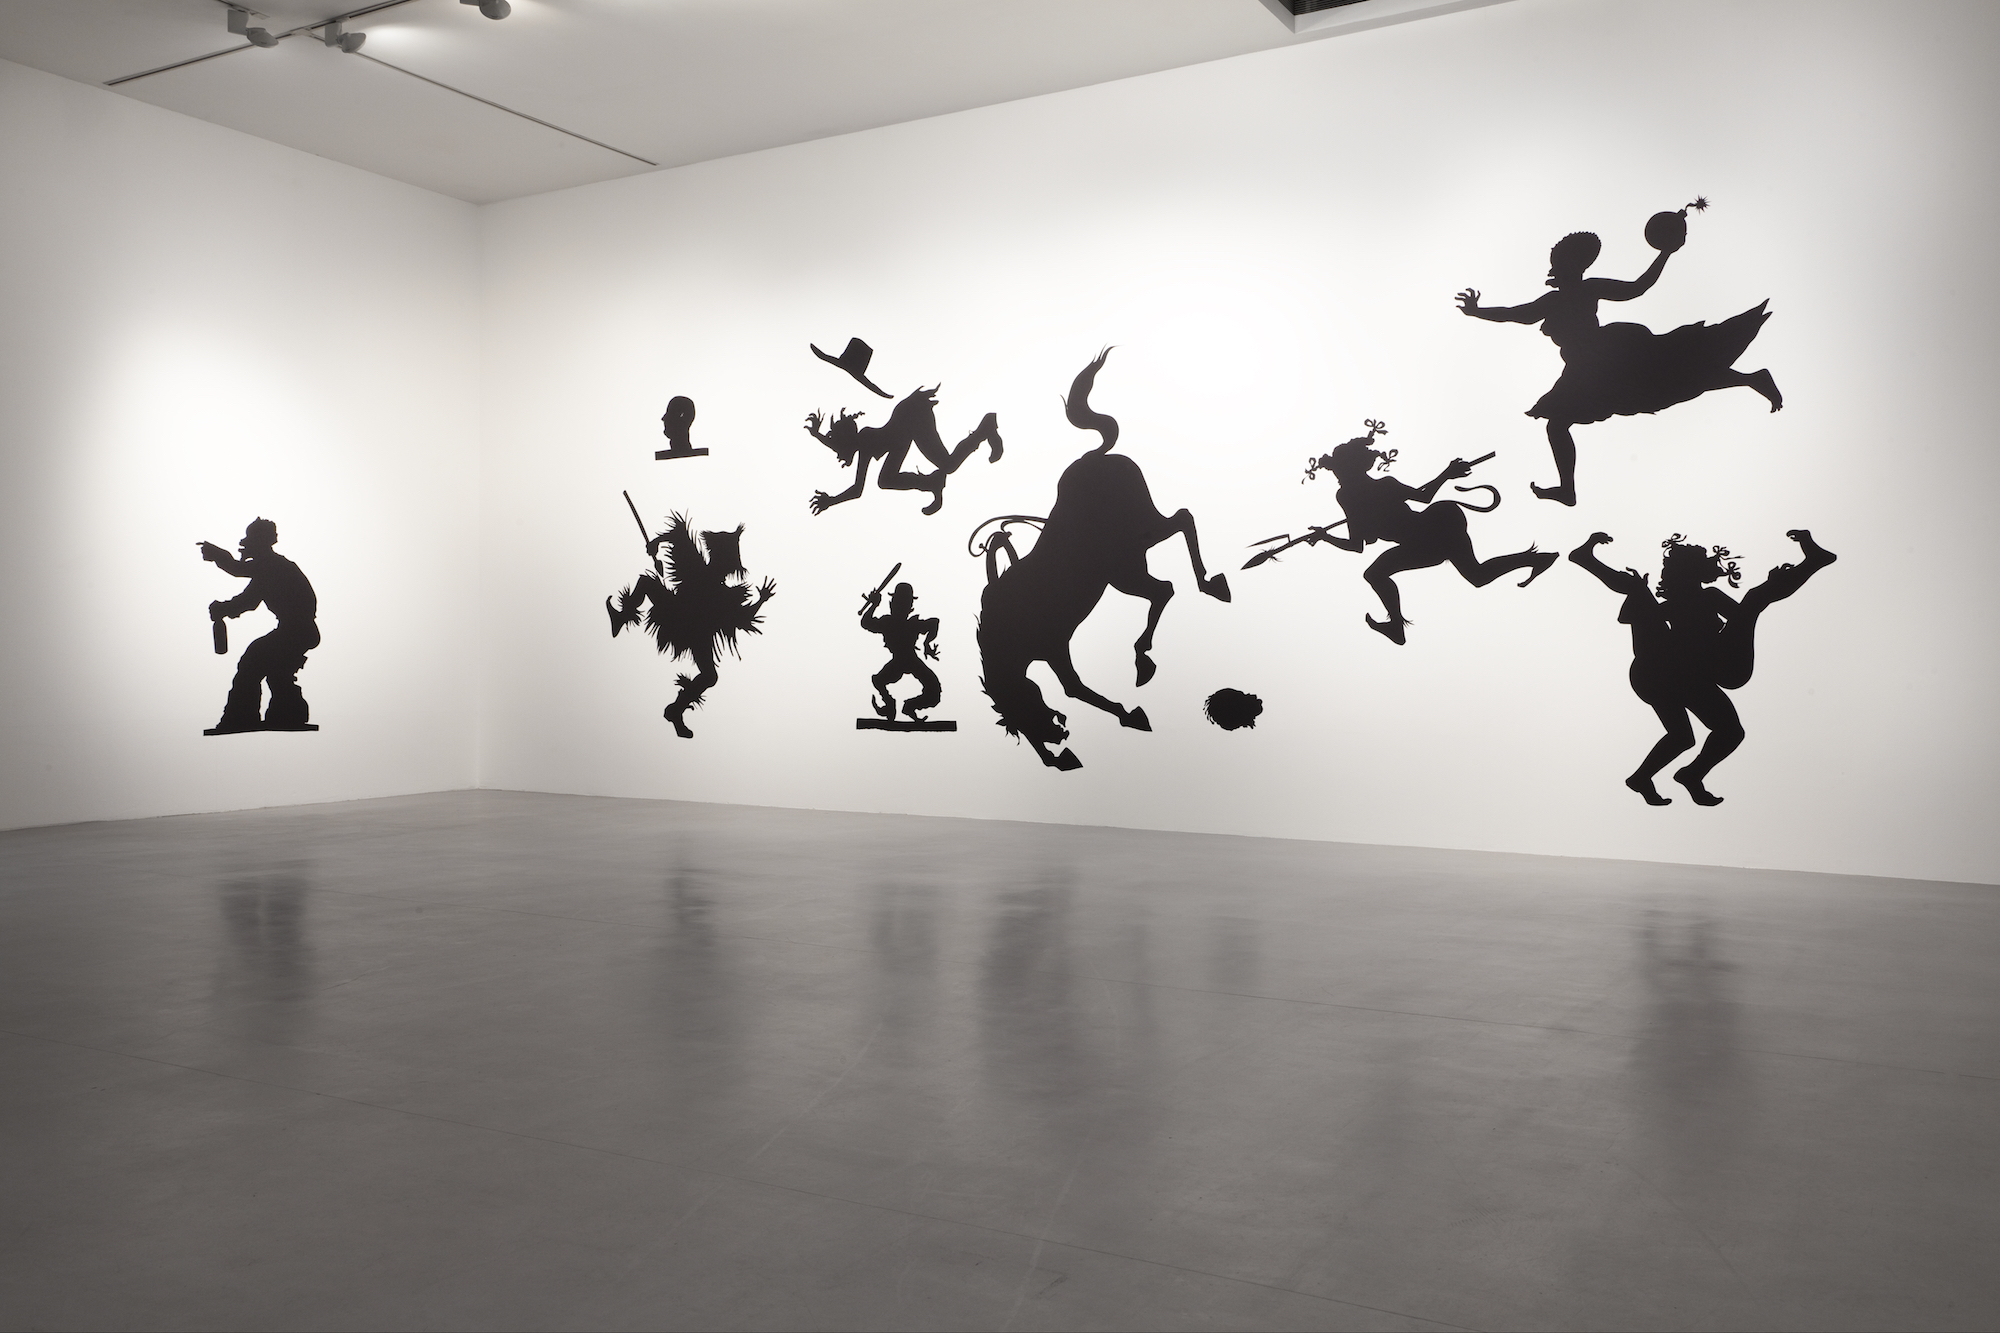  Kara Walker,&nbsp; Auntie Walker's Wall Sampler for Savages , 2013. Cut paper on wall, approx. 132 x 408 inches.&nbsp;Camden Arts Centre, London, 2013. Photo: Angus Mill Photography 